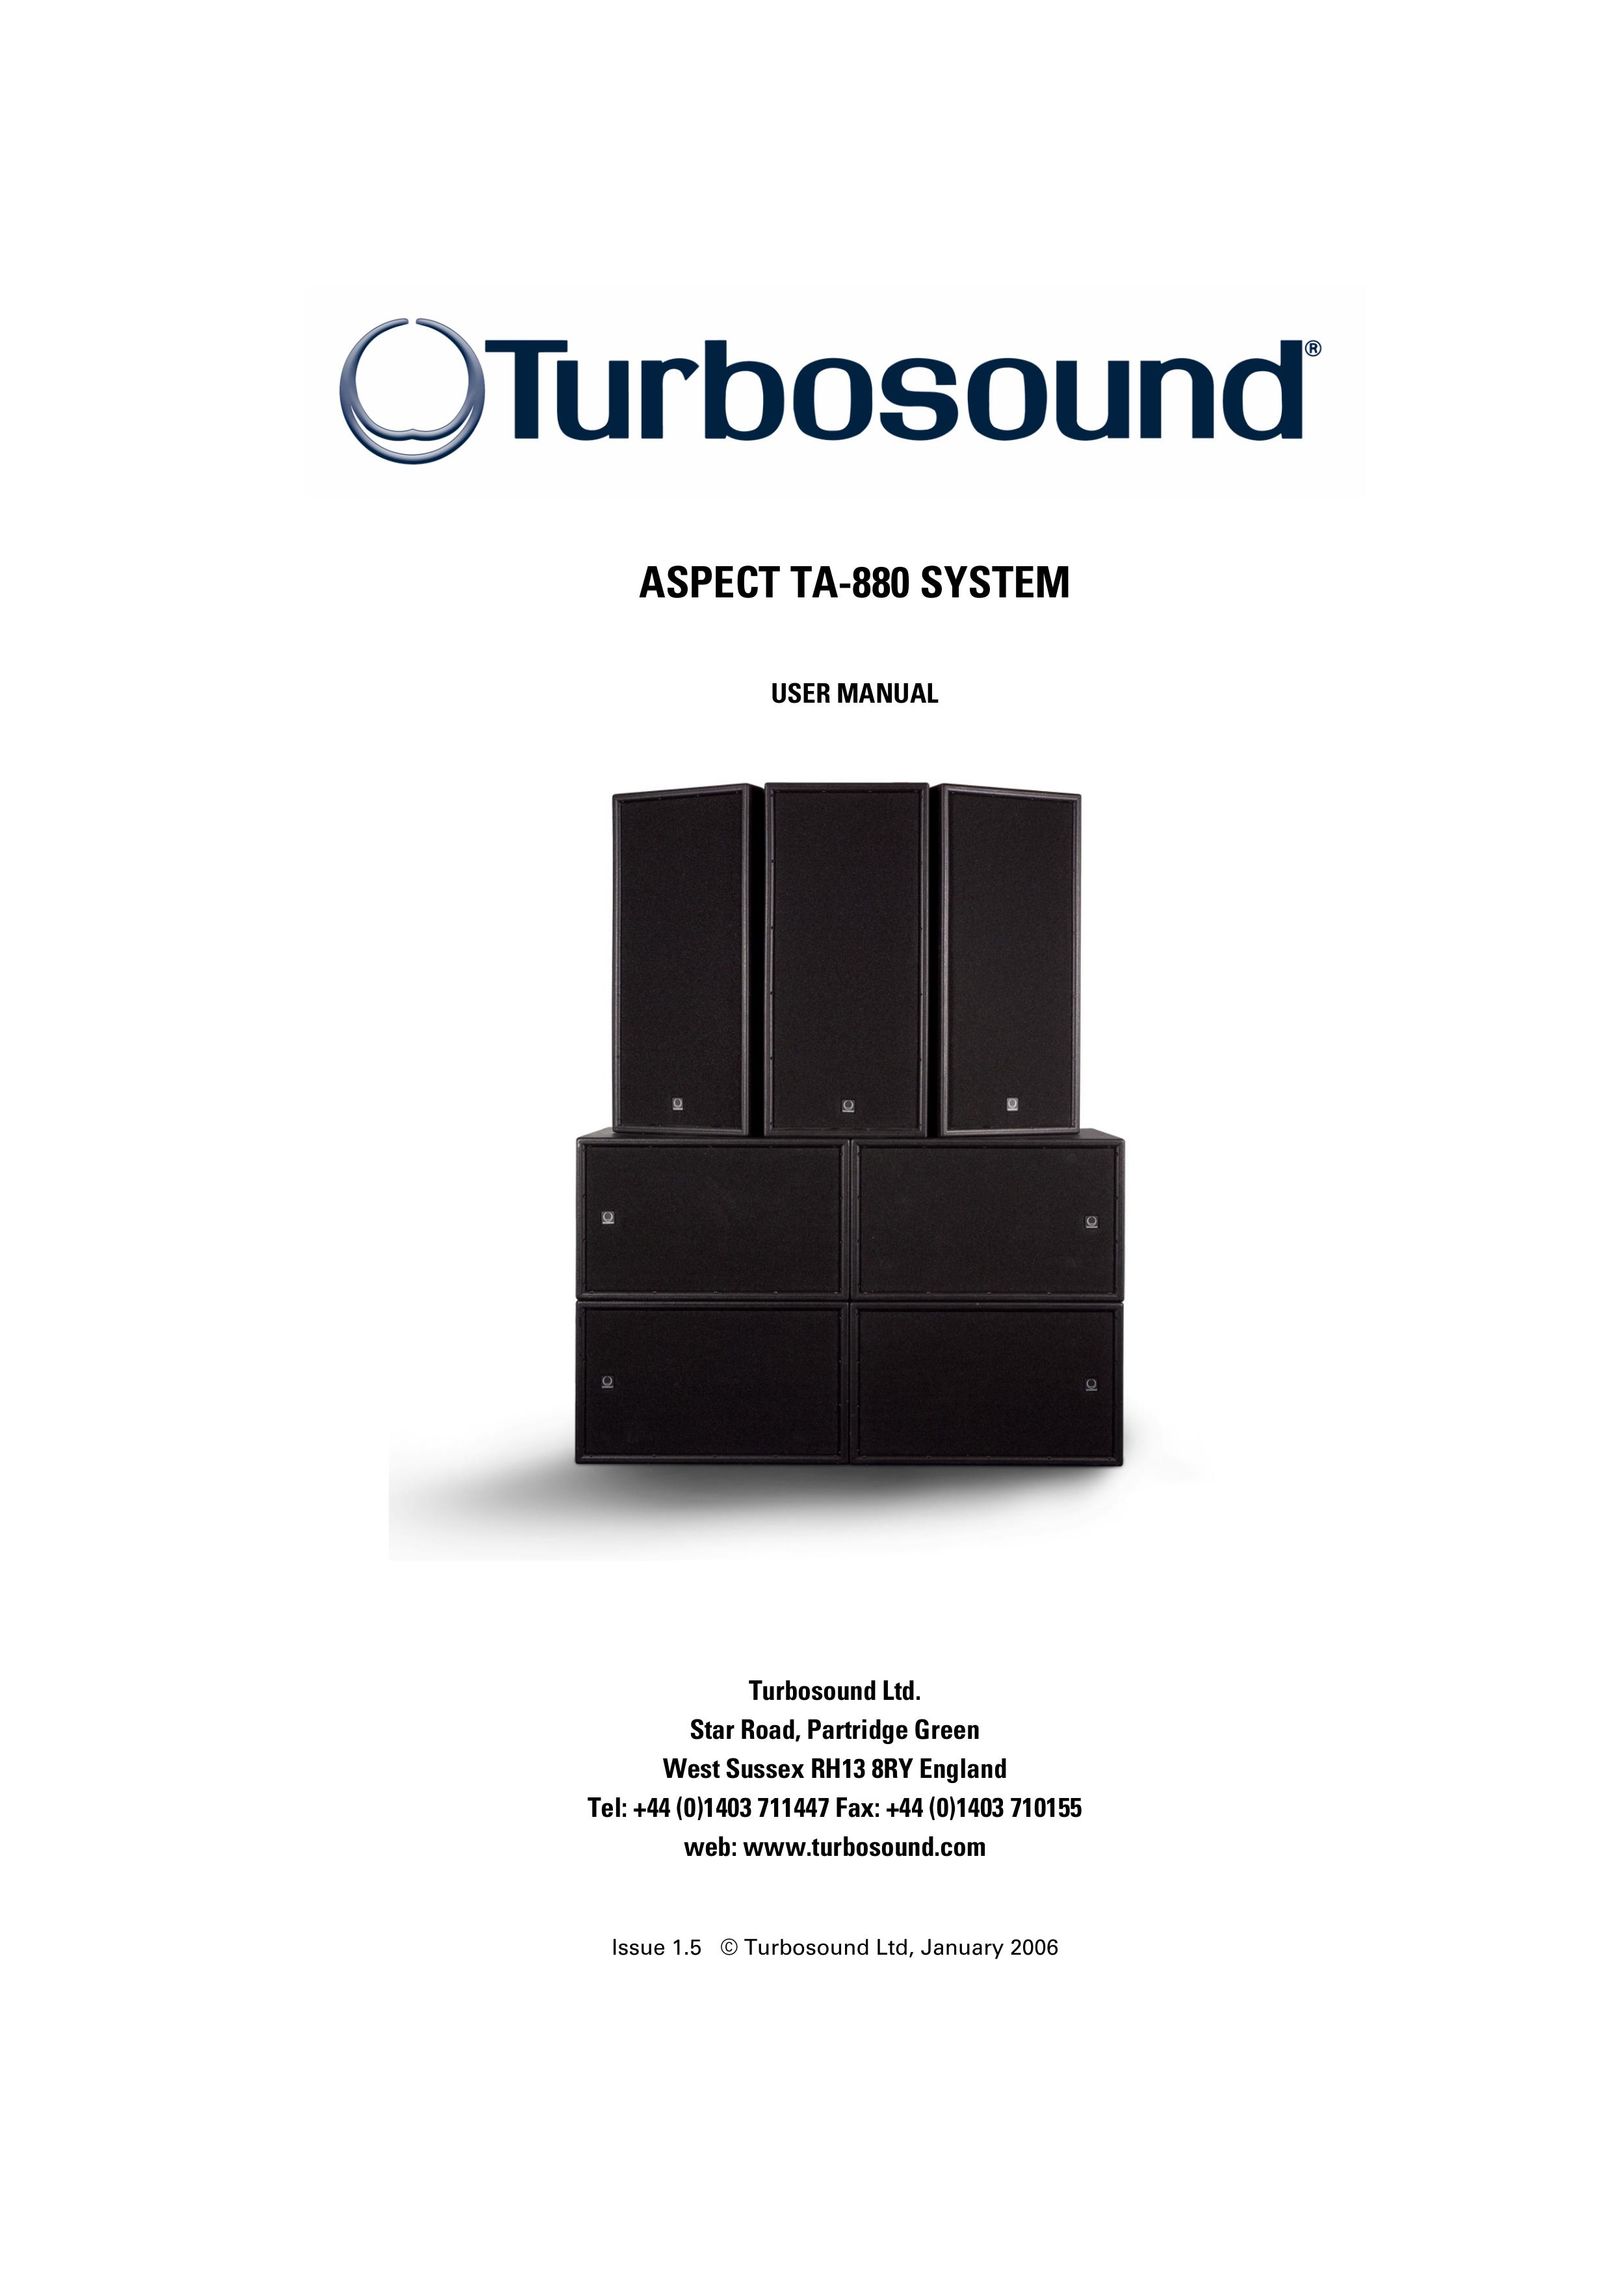 Turbosound TA-880 Home Theater System User Manual